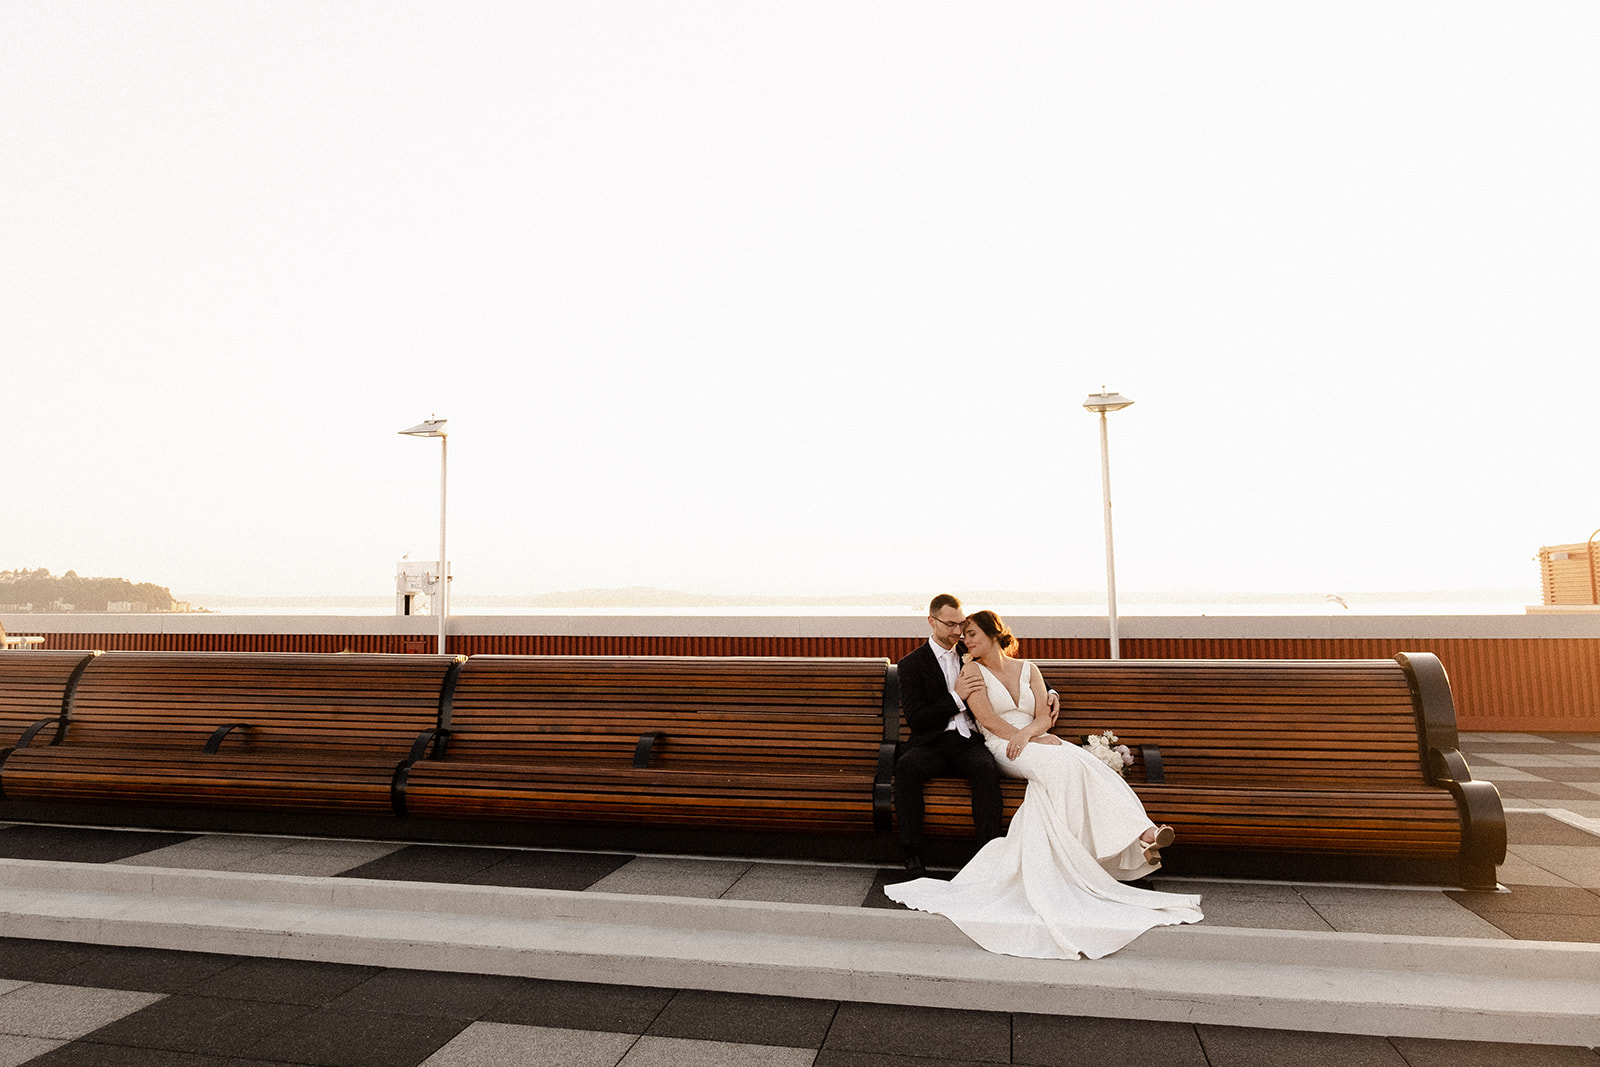 Wedding couple sitting together at sunset on a bench